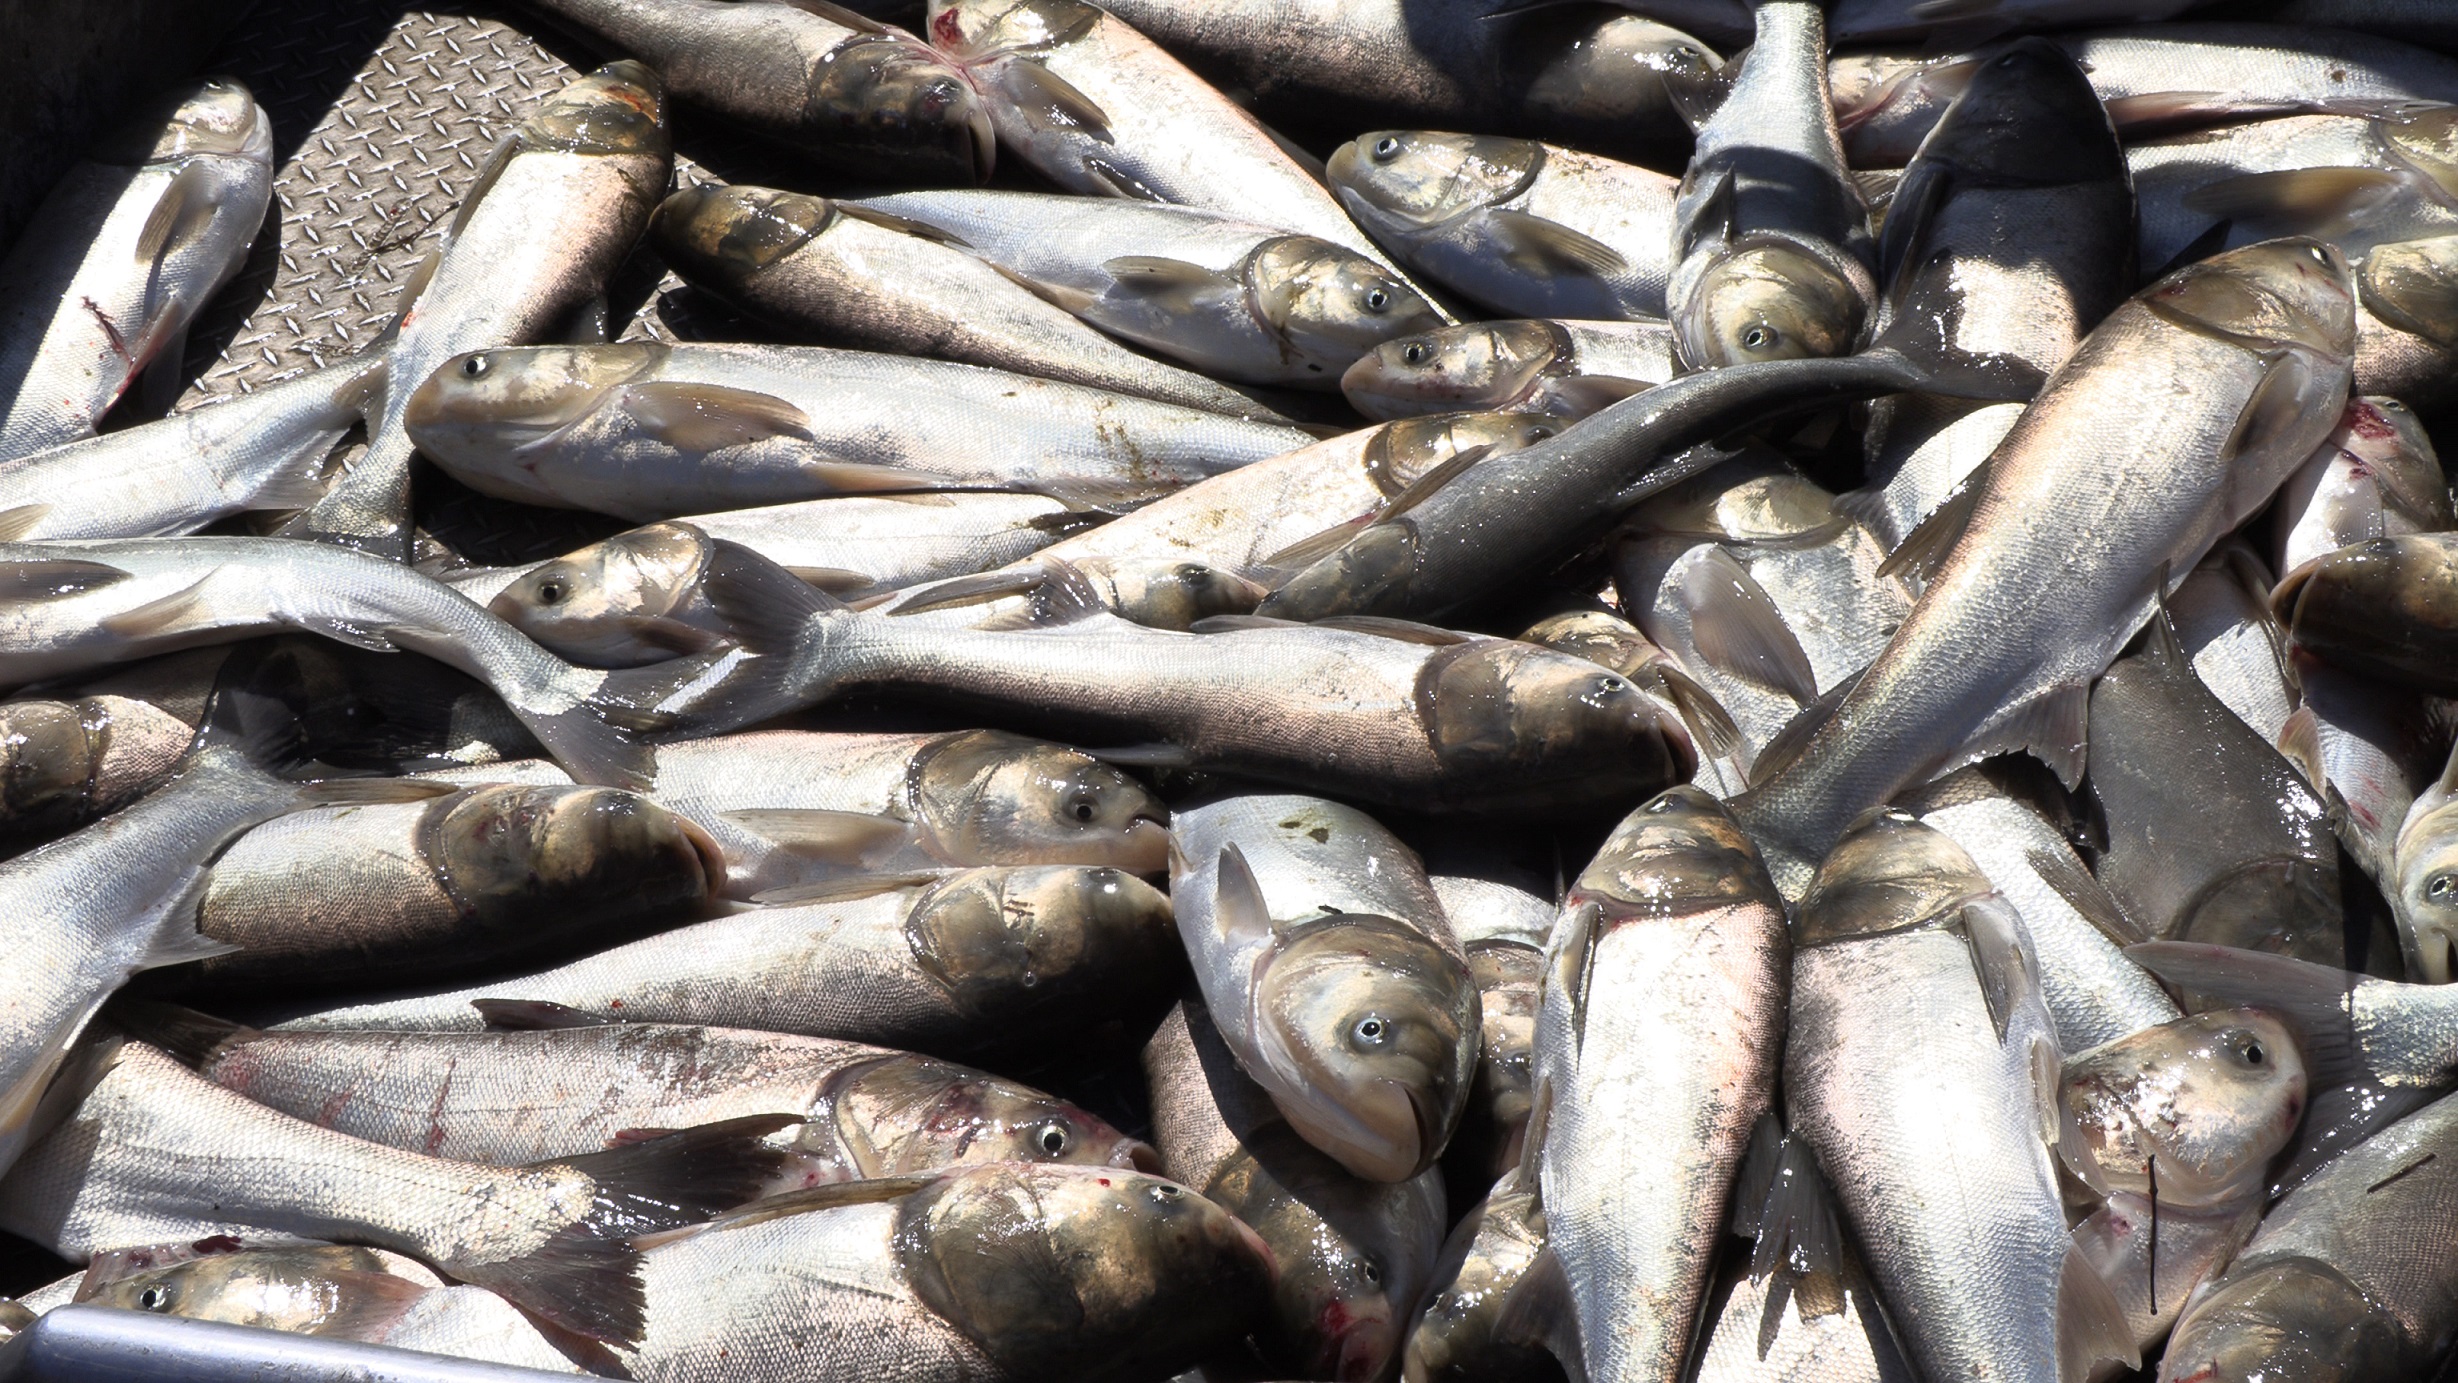 Nothing goes to waste. Silver Carp fillets are shipped to 11 countries worldwide. The heads are shipped to the northeast U.S. to be used as bait in lobster traps, the rest is turned into fertilizer.